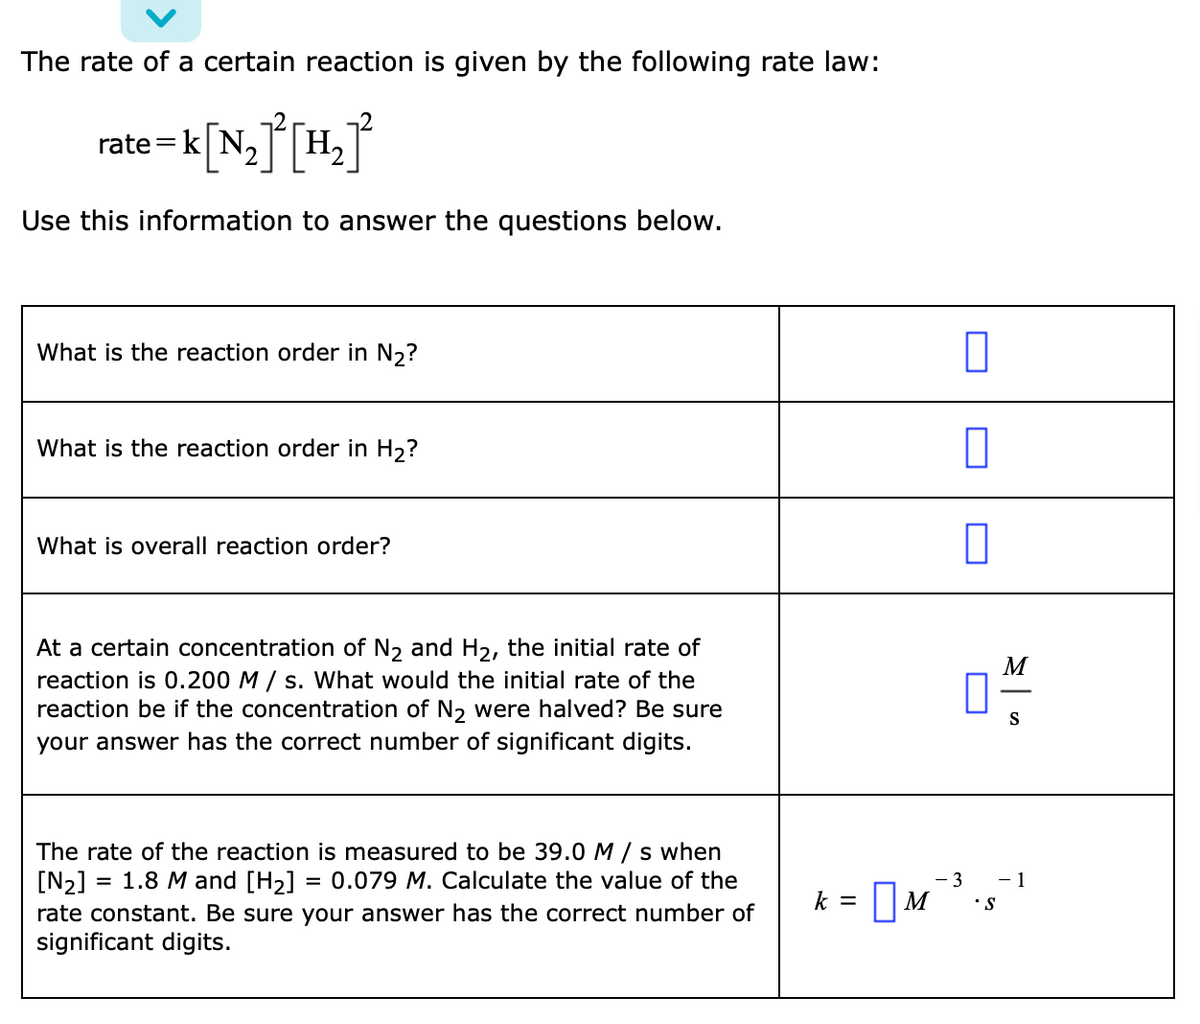 The rate of a certain reaction is given by the following rate law:
rate =k[N,J[H,
2.
Use this information to answer the questions below.
What is the reaction order in N2?
What is the reaction order in H2?
What is overall reaction order?
At a certain concentration of N, and H2, the initial rate of
reaction is 0.200 M / s. What would the initial rate of the
reaction be if the concentration of N2 were halved? Be sure
your answer has the correct number of significant digits.
M
S
The rate of the reaction is measured to be 39.0 M / s when
[N2] = 1.8 M and [H2]
rate constant. Be sure your answer has the correct number of
significant digits.
= 0.079 M. Calculate the value of the
- 3
- 1
|M
k =
•S
